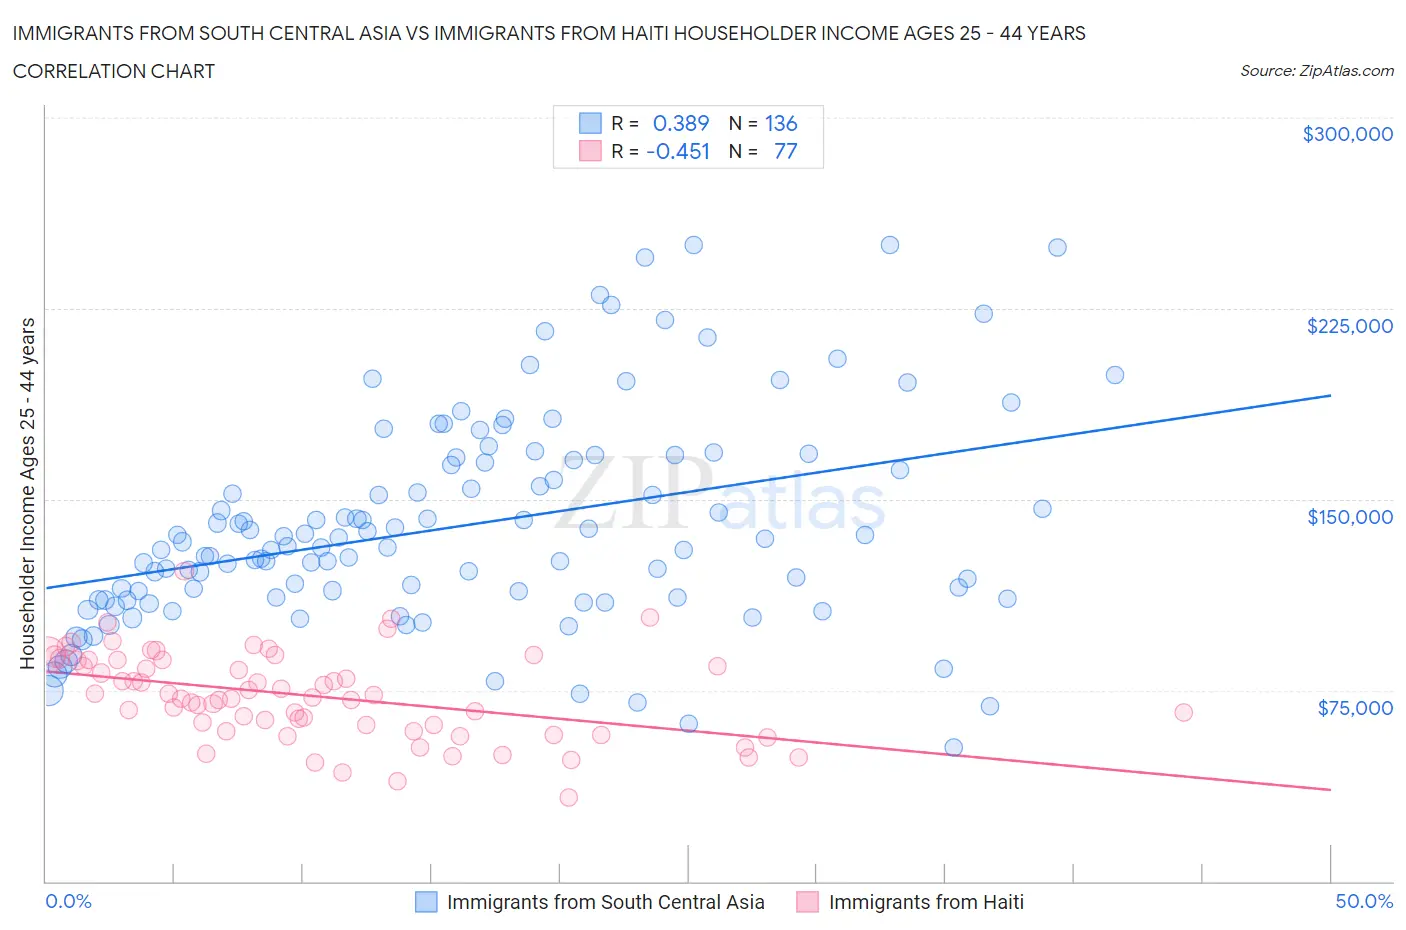 Immigrants from South Central Asia vs Immigrants from Haiti Householder Income Ages 25 - 44 years